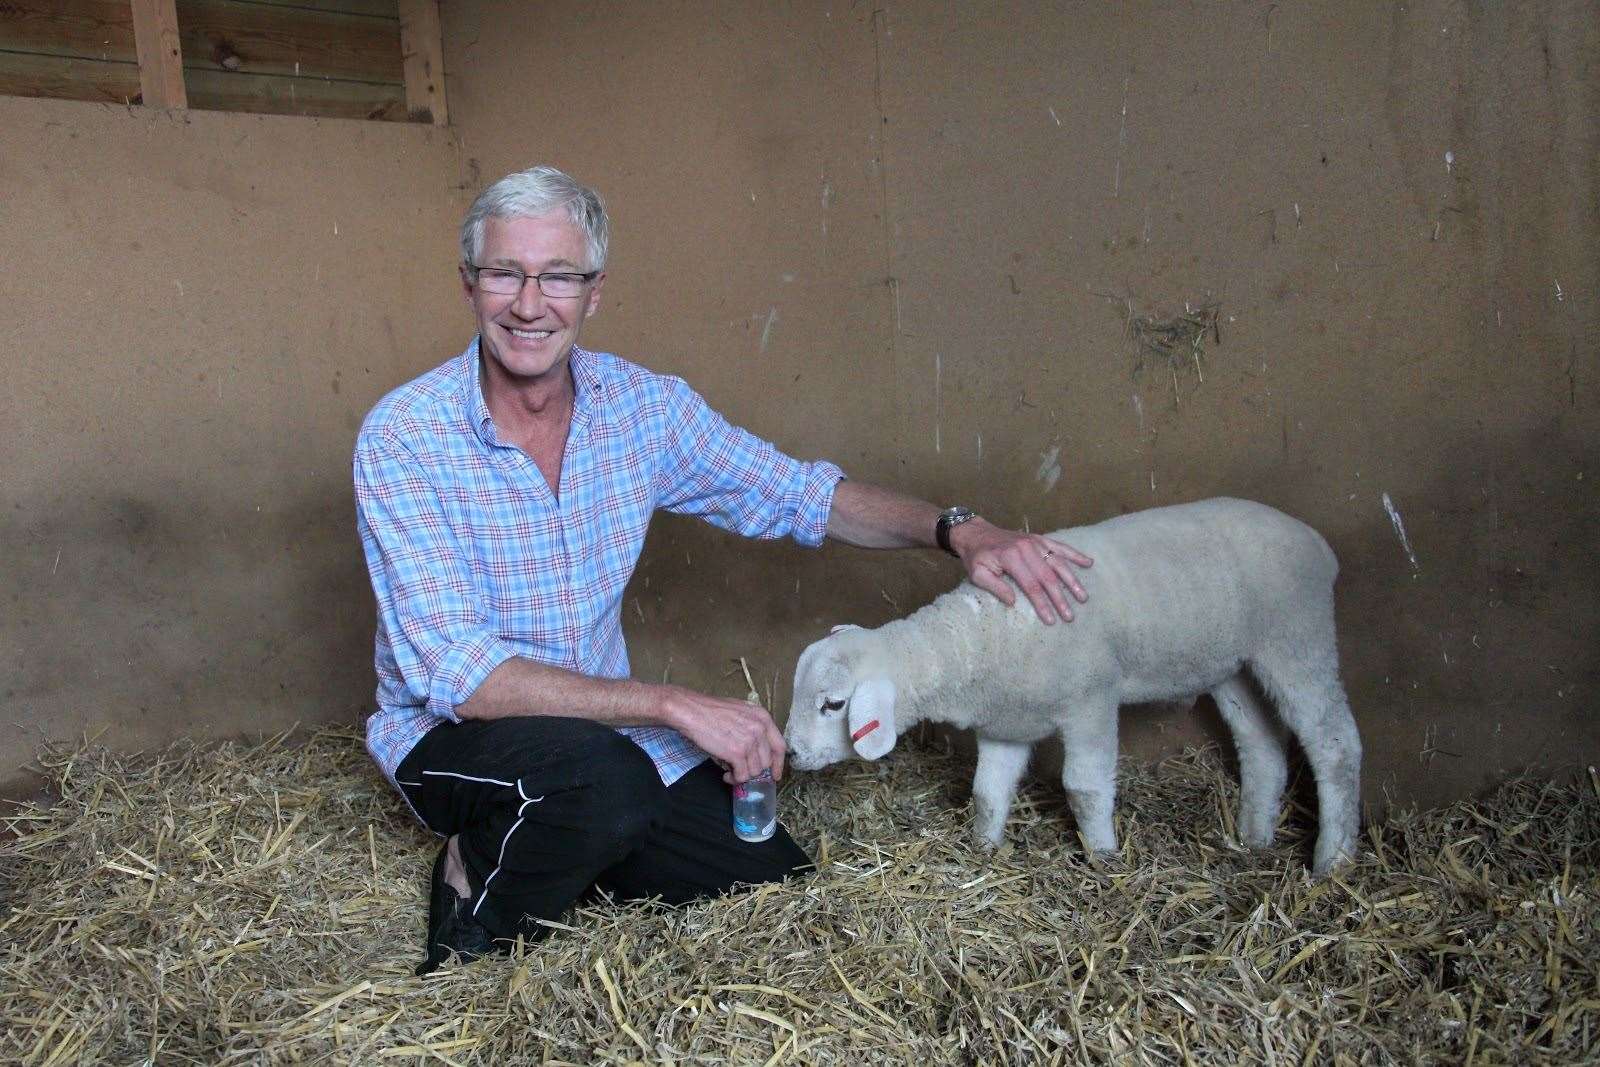 Paul O Grady and Winston, who he adopted from the RSPCA. Winston was found dumped in a wheelie bin in Manchester in 2011. Picture: Joe Murphy/RSPCA